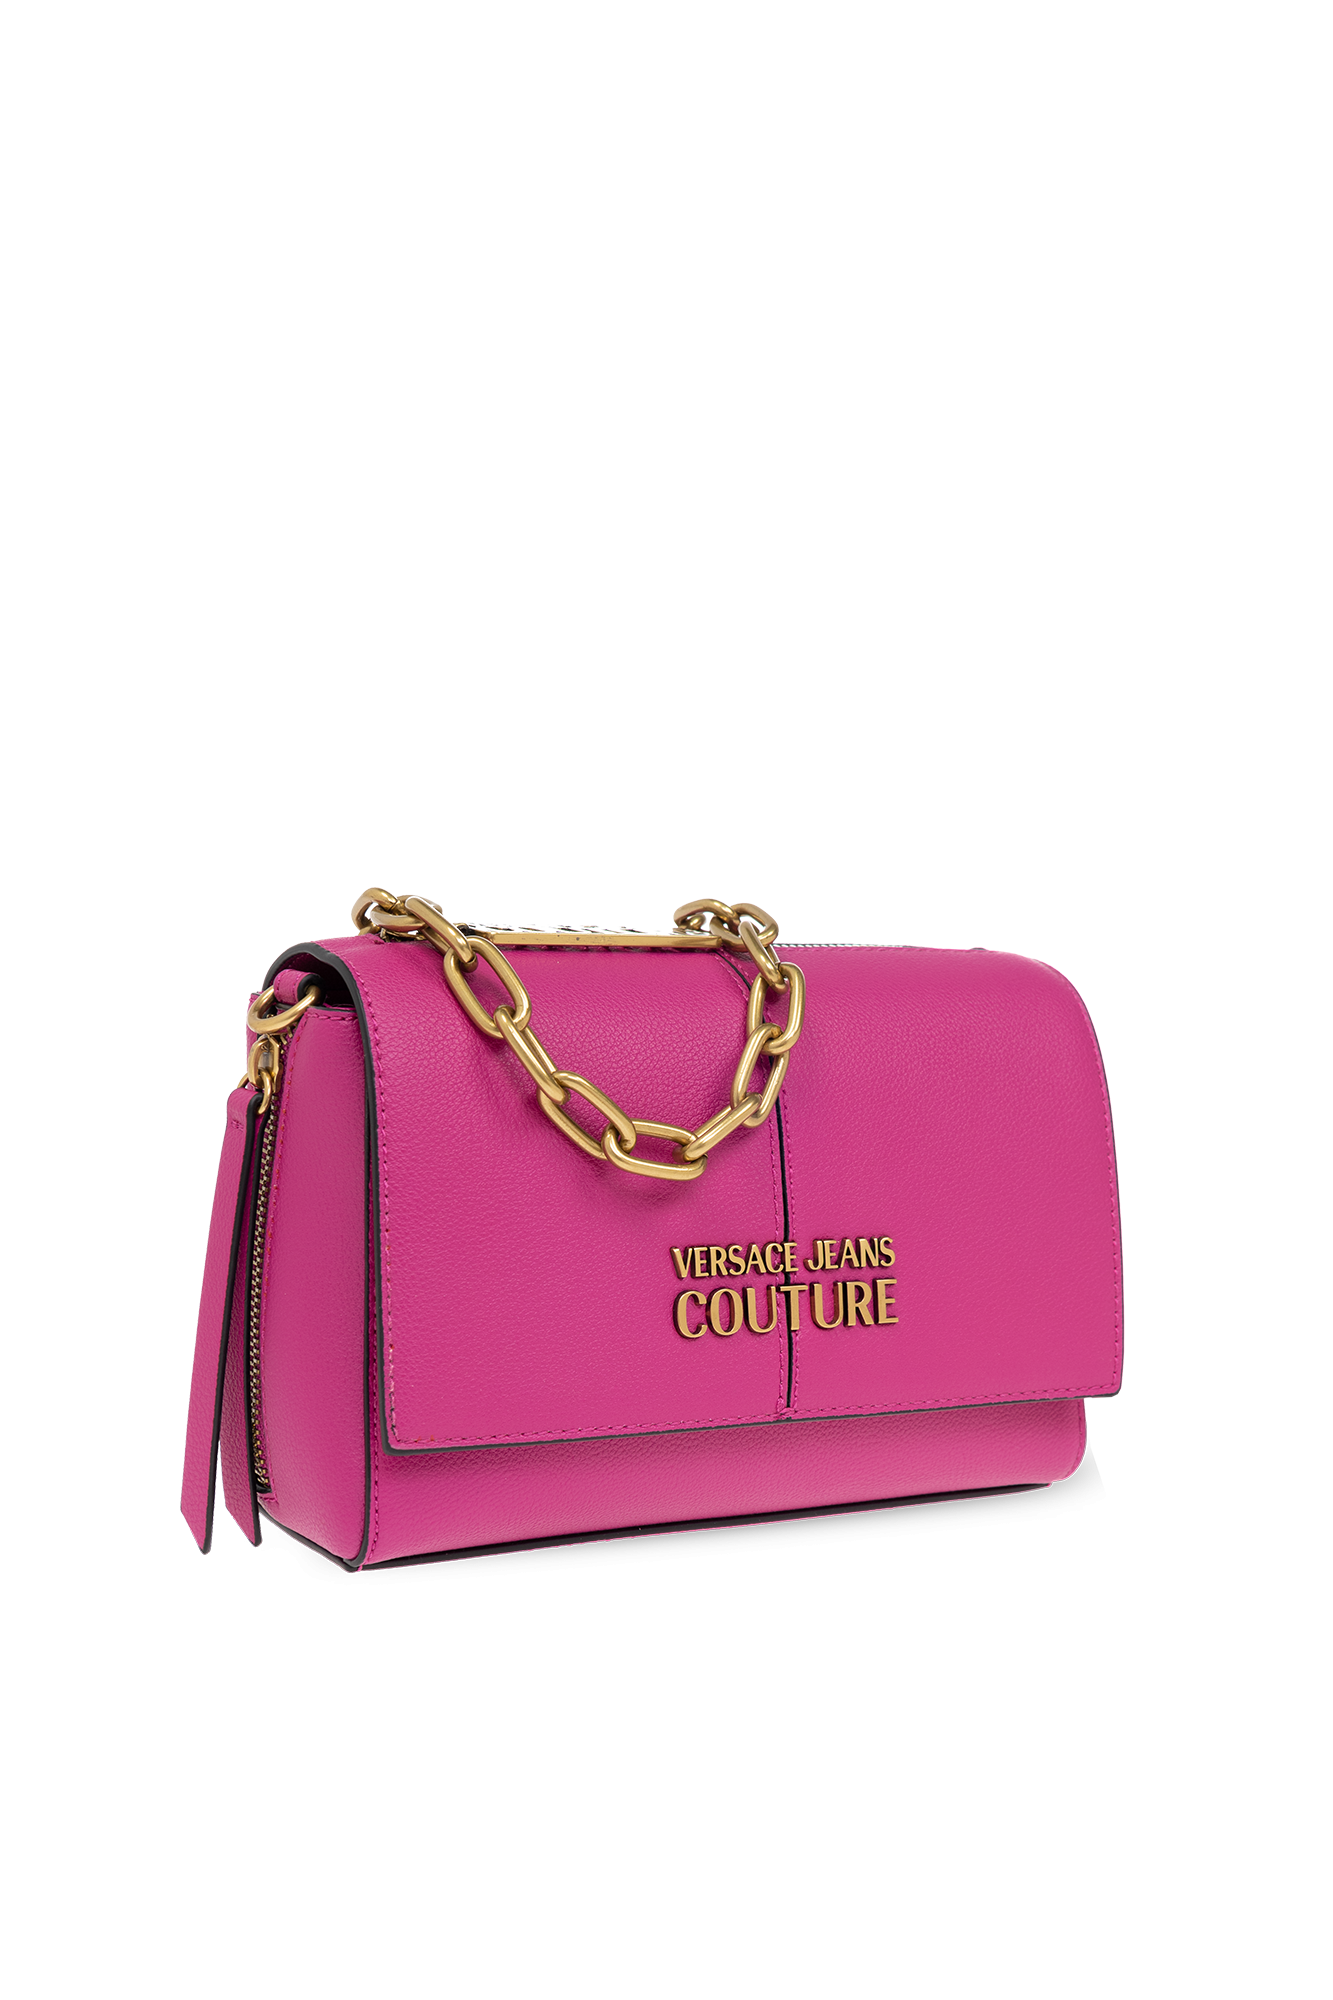 Versace Jeans Couture Pink Couture I Bag